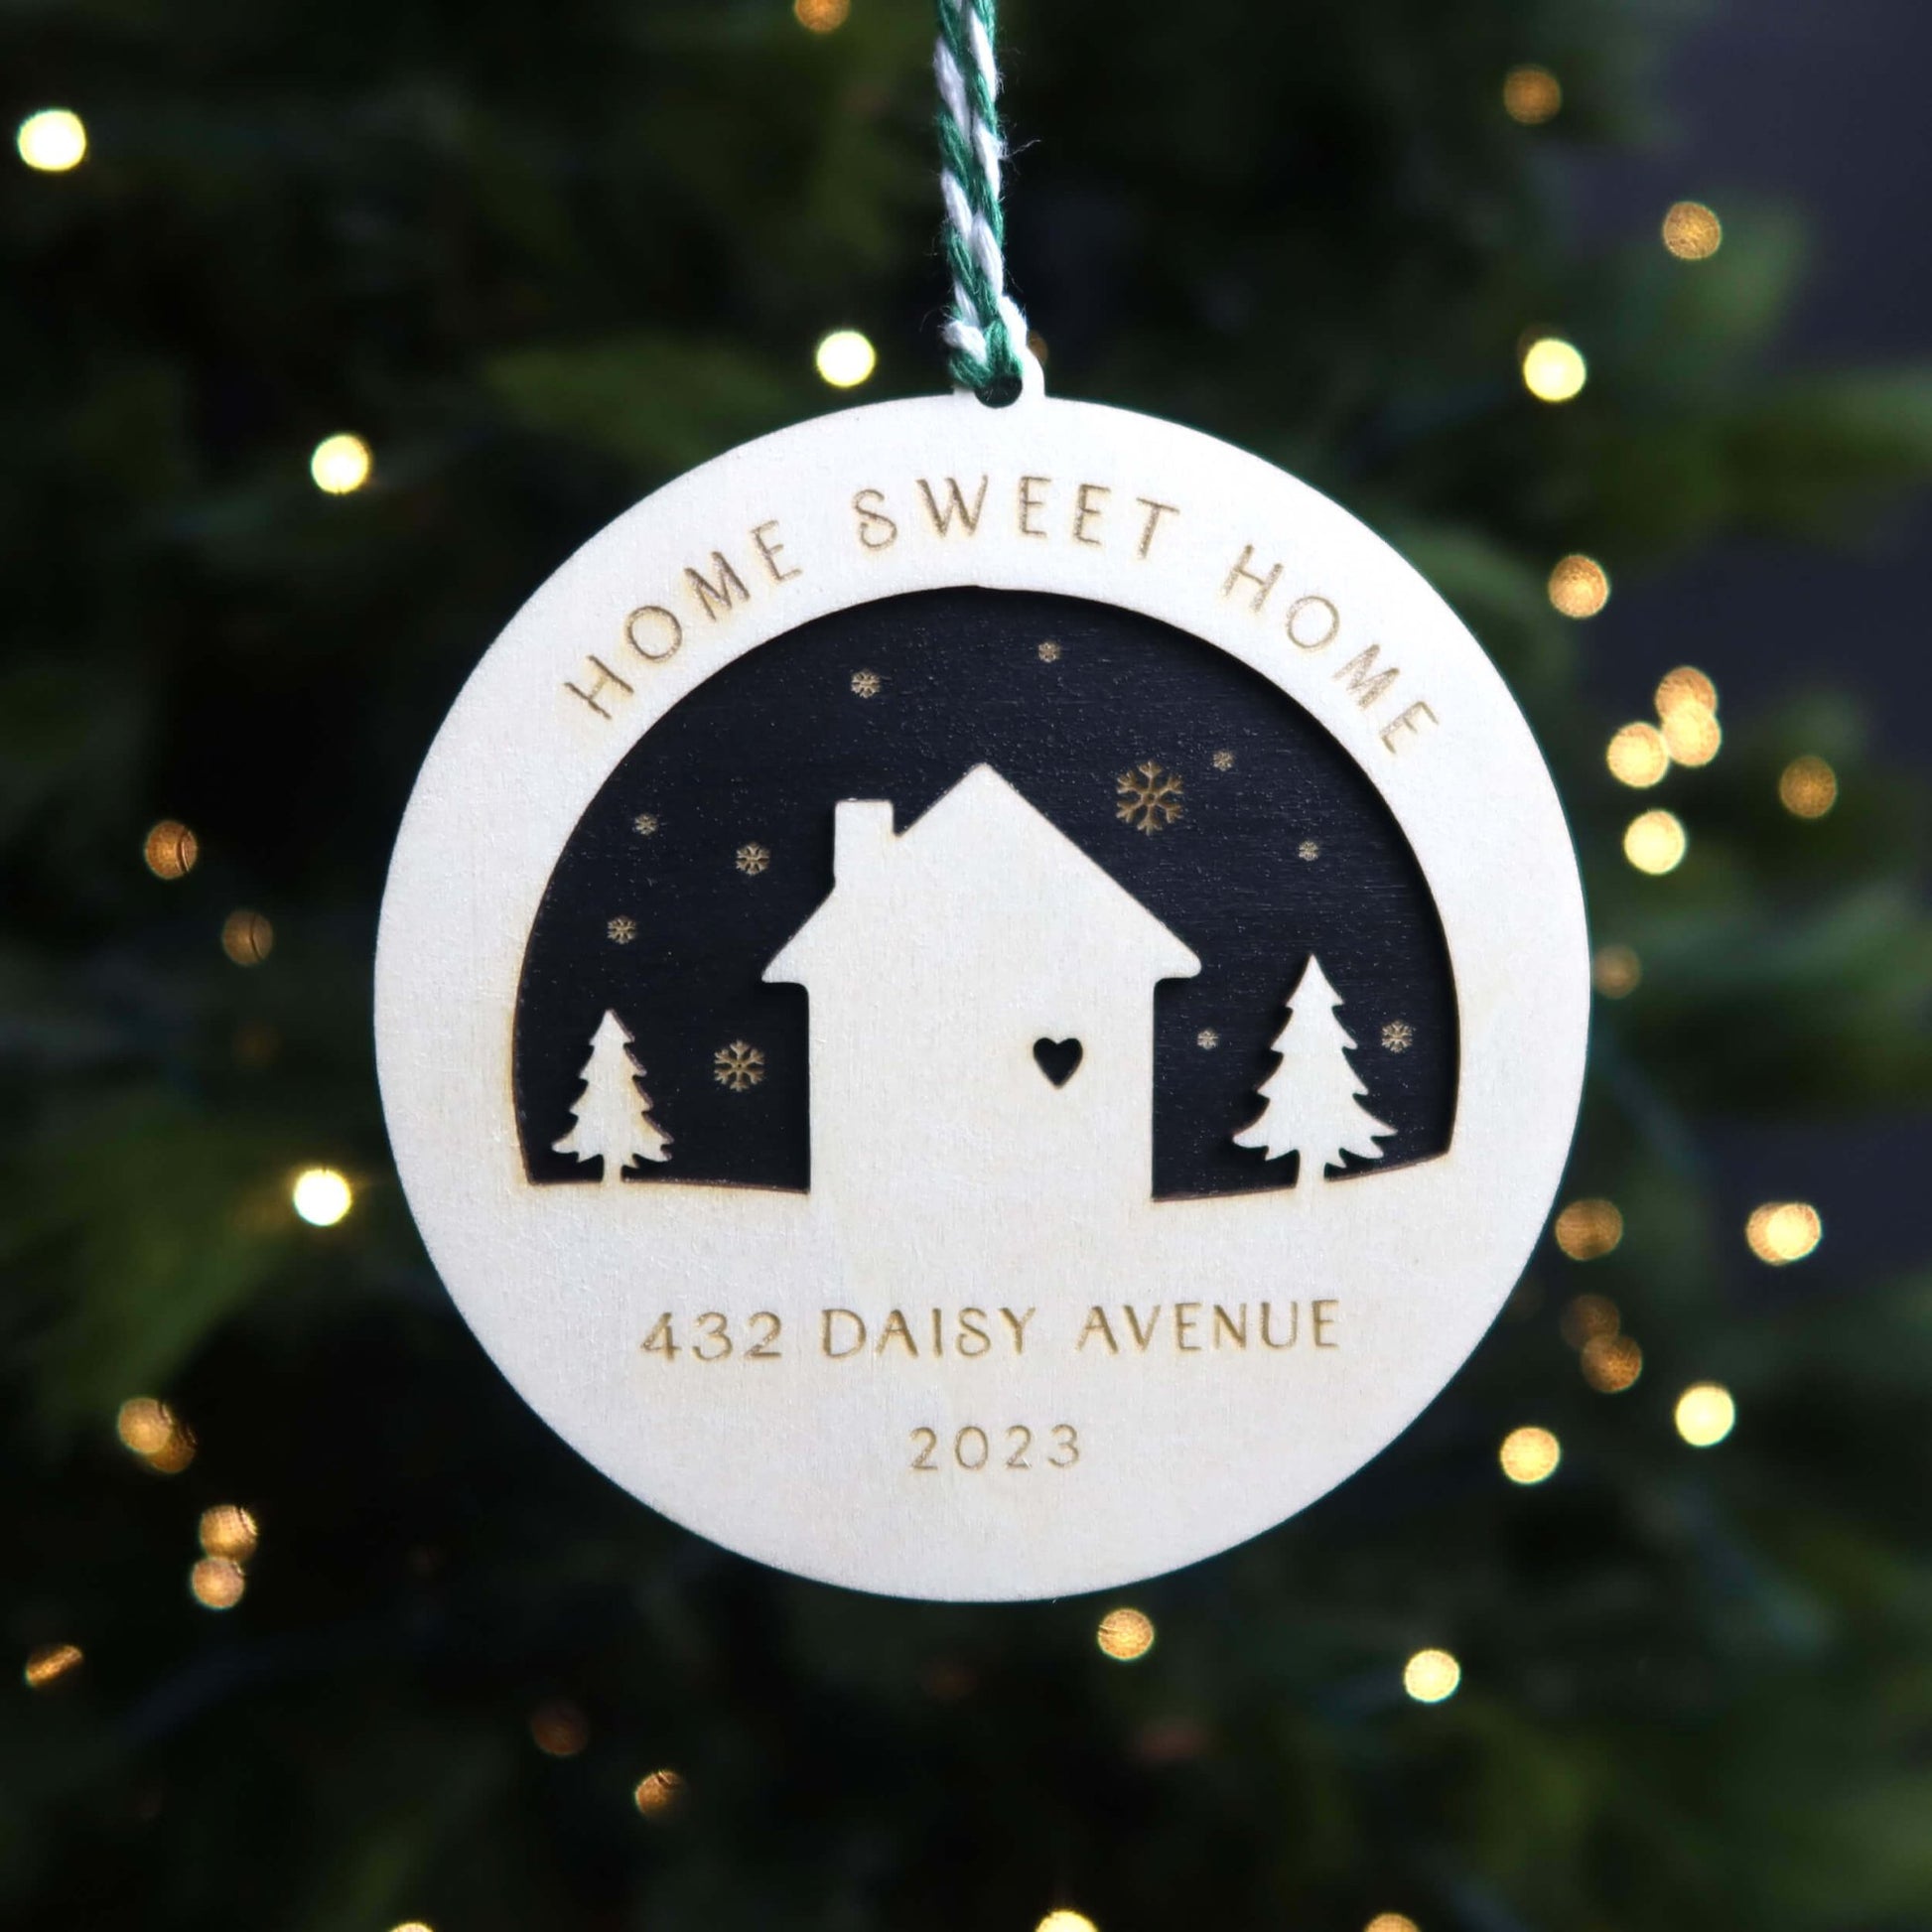 Home Sweet Home Ornament Personalized - Holiday Ornaments - Moon Rock Prints